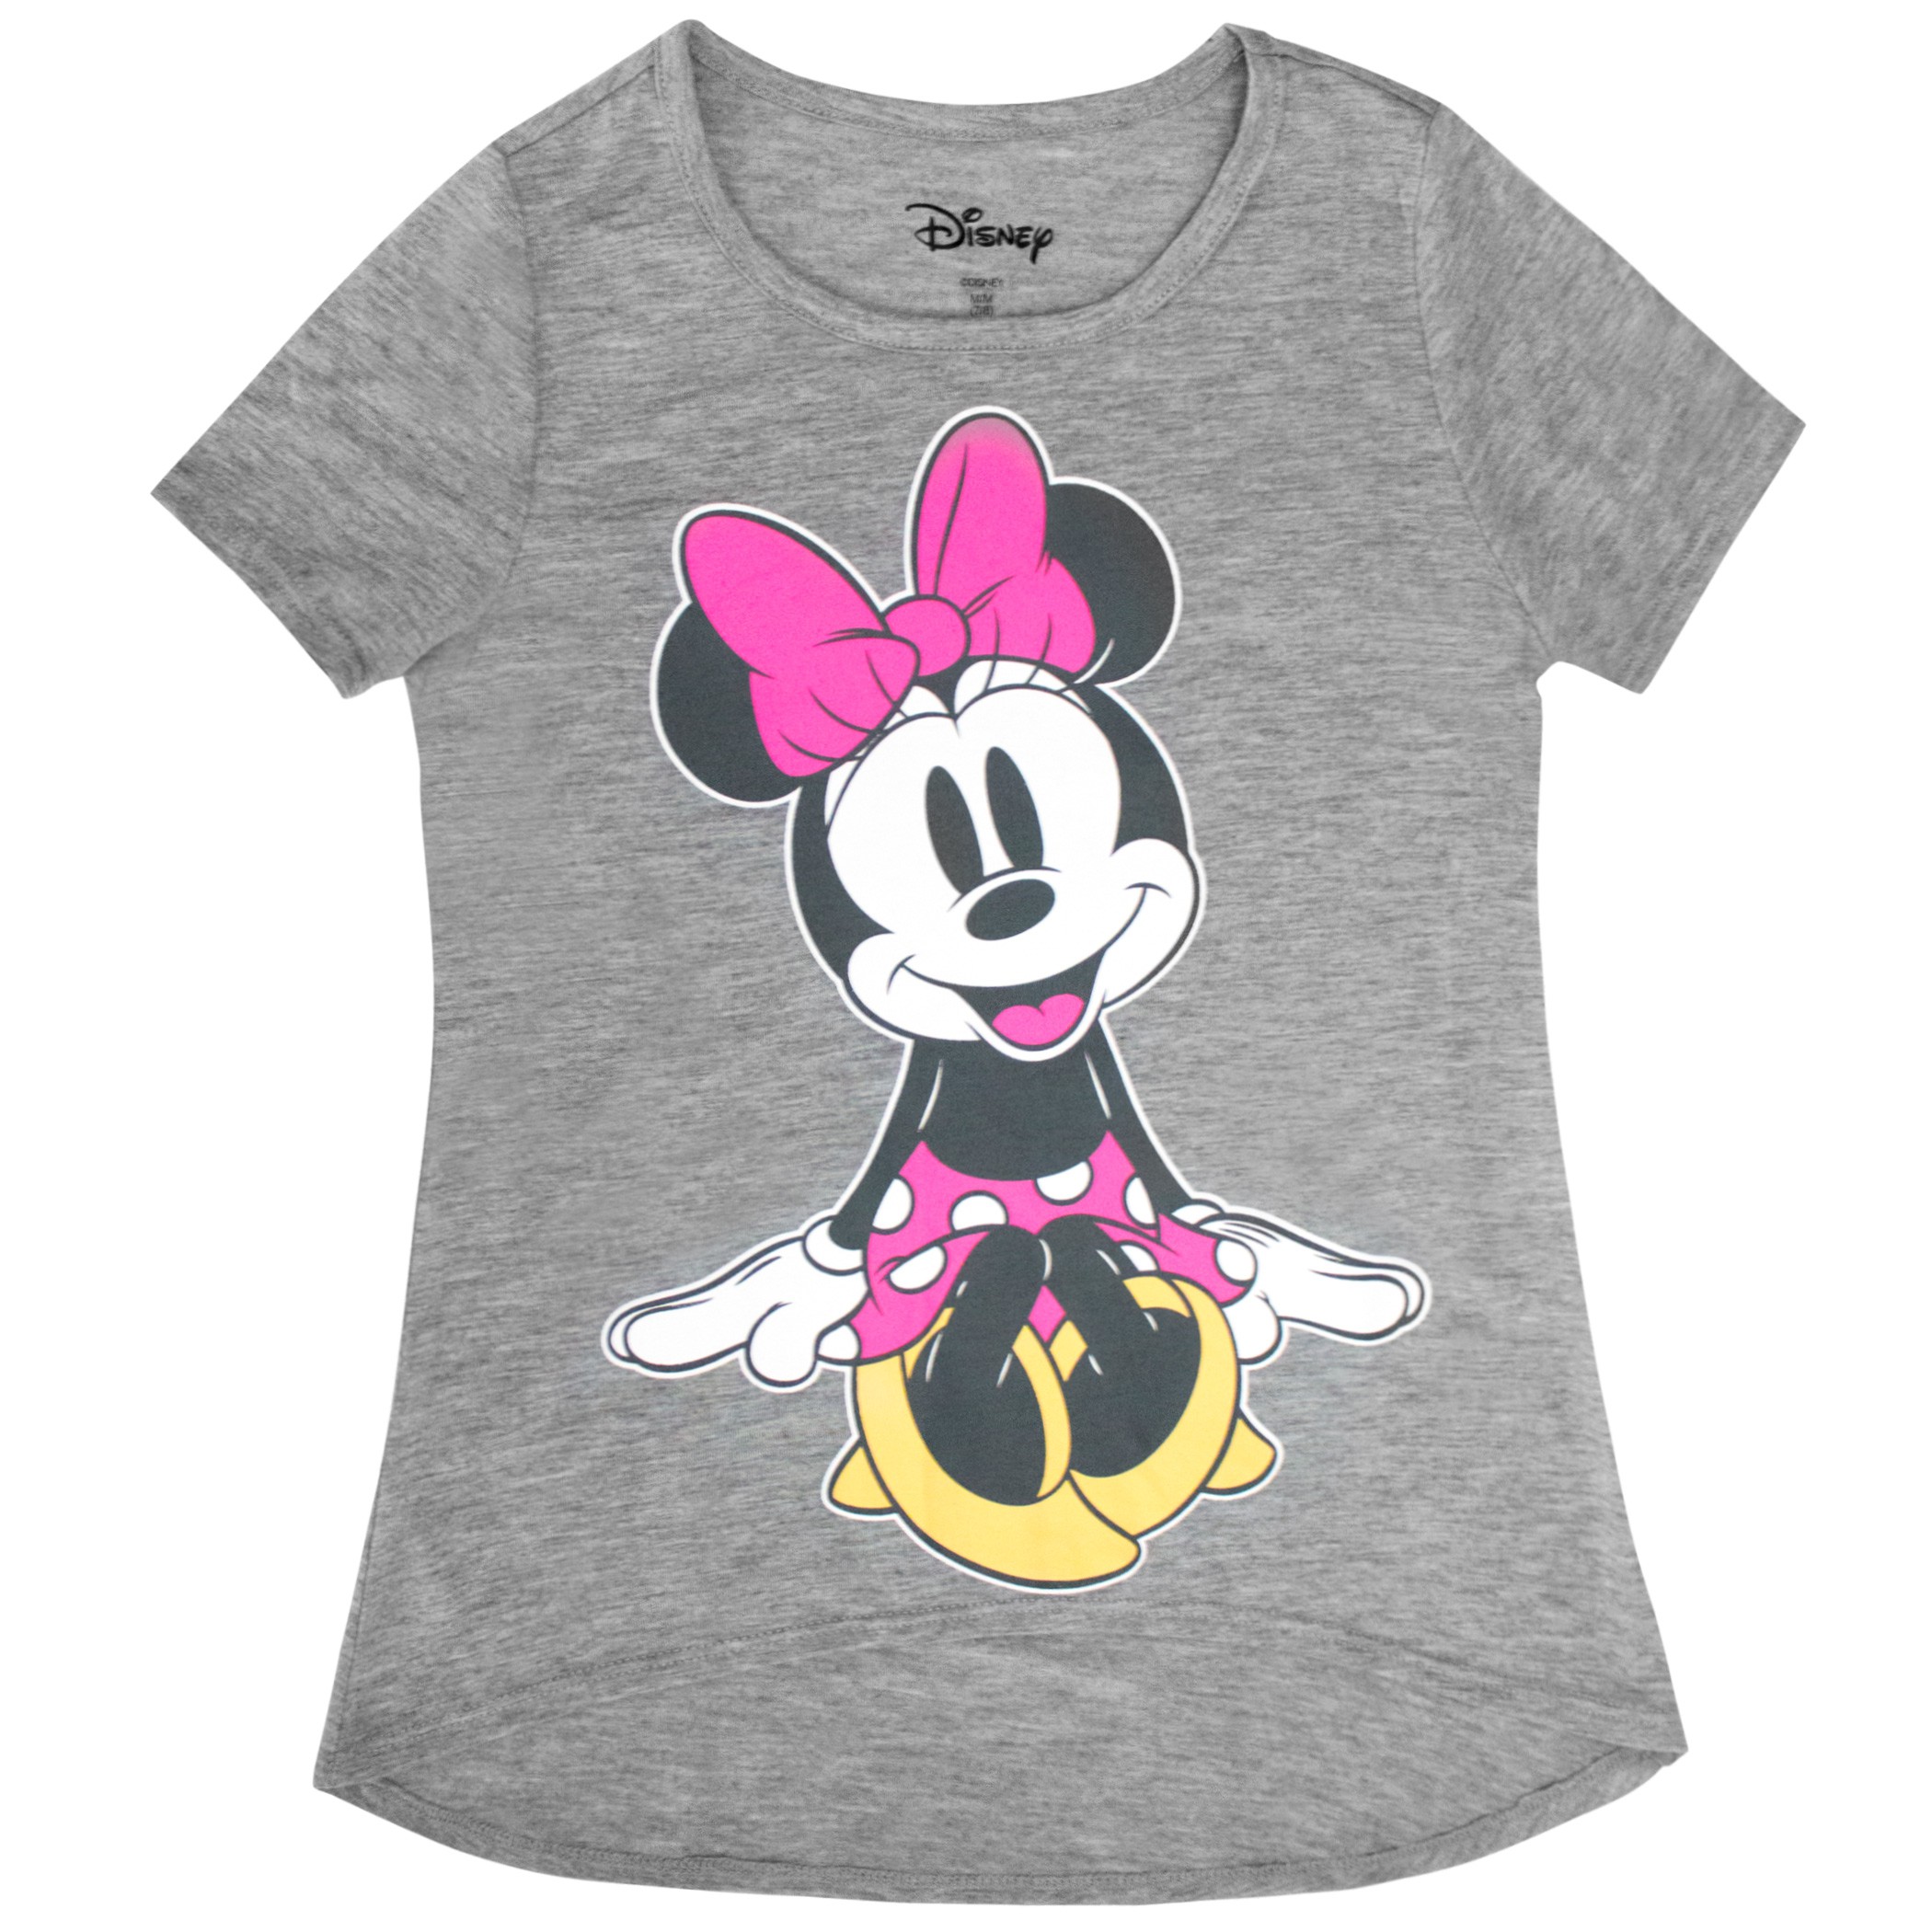 Minnie Mouse Cutie Youth Girl's Grey Tee Shirt